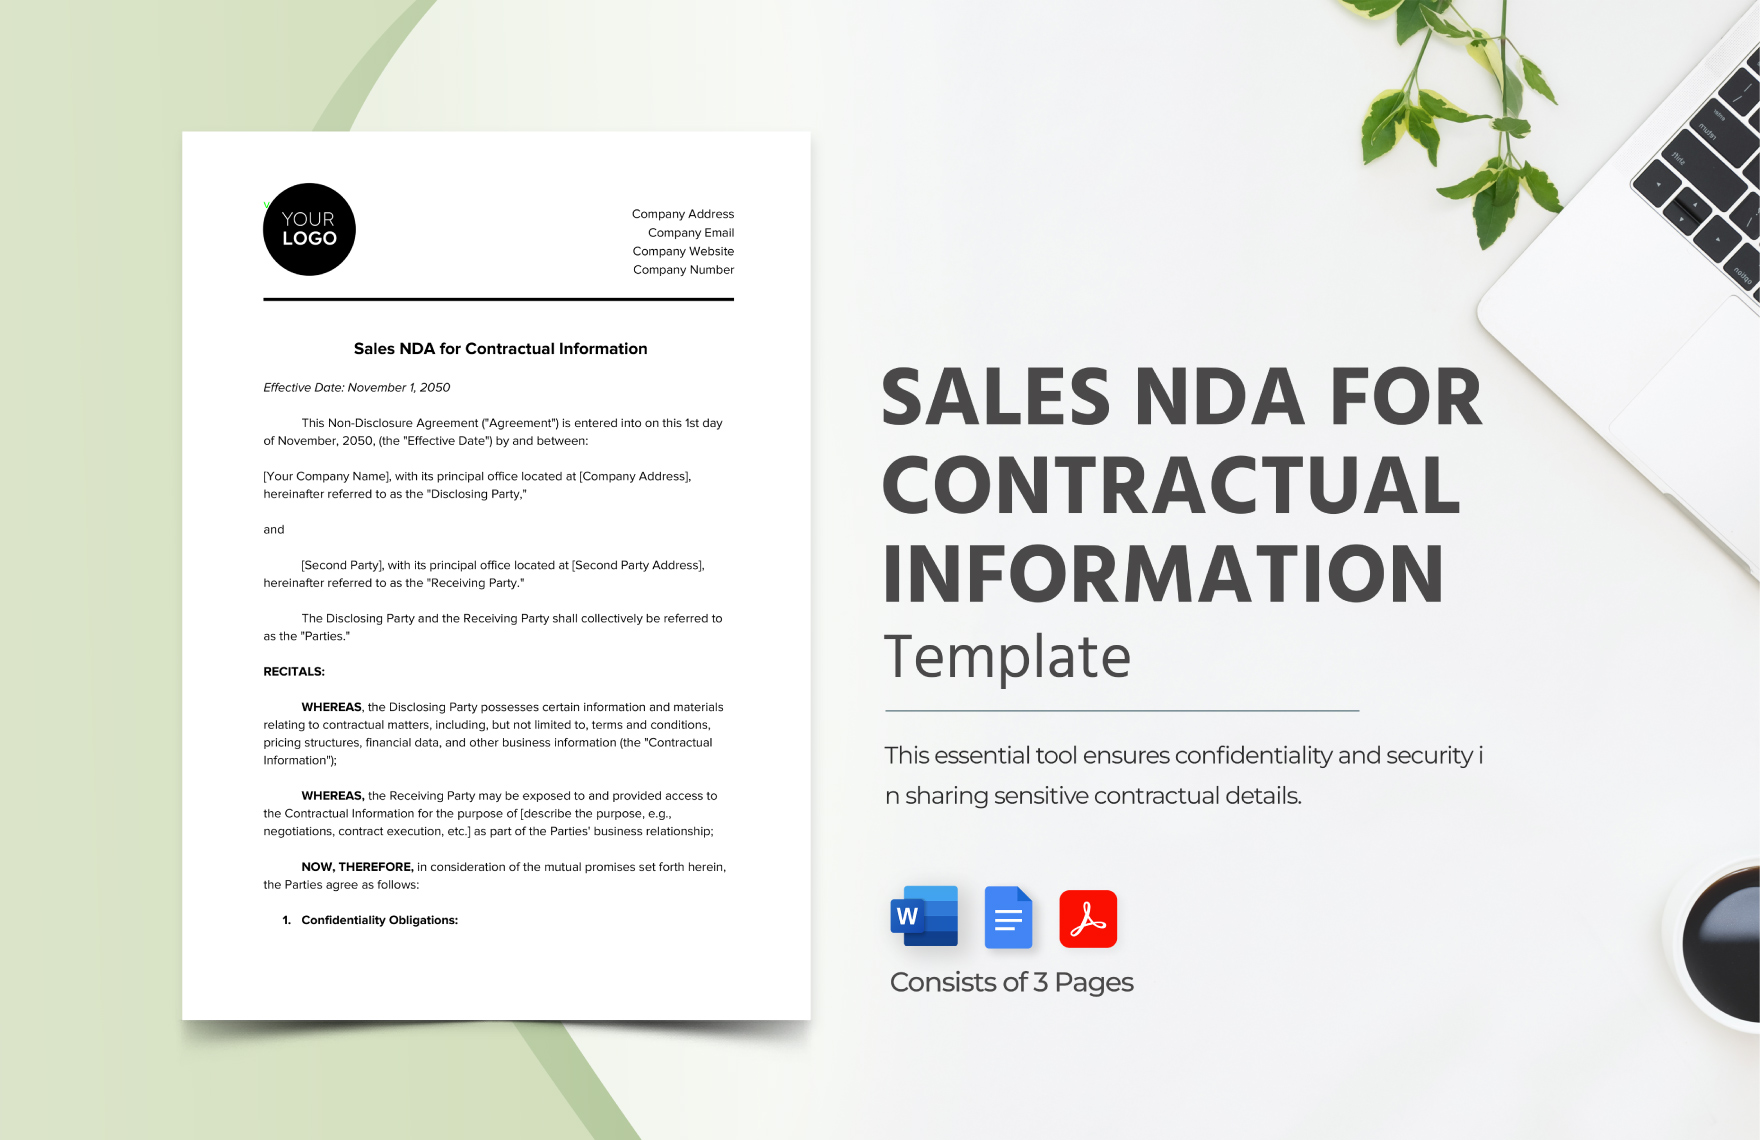 Sales NDA for Contractual Information Template